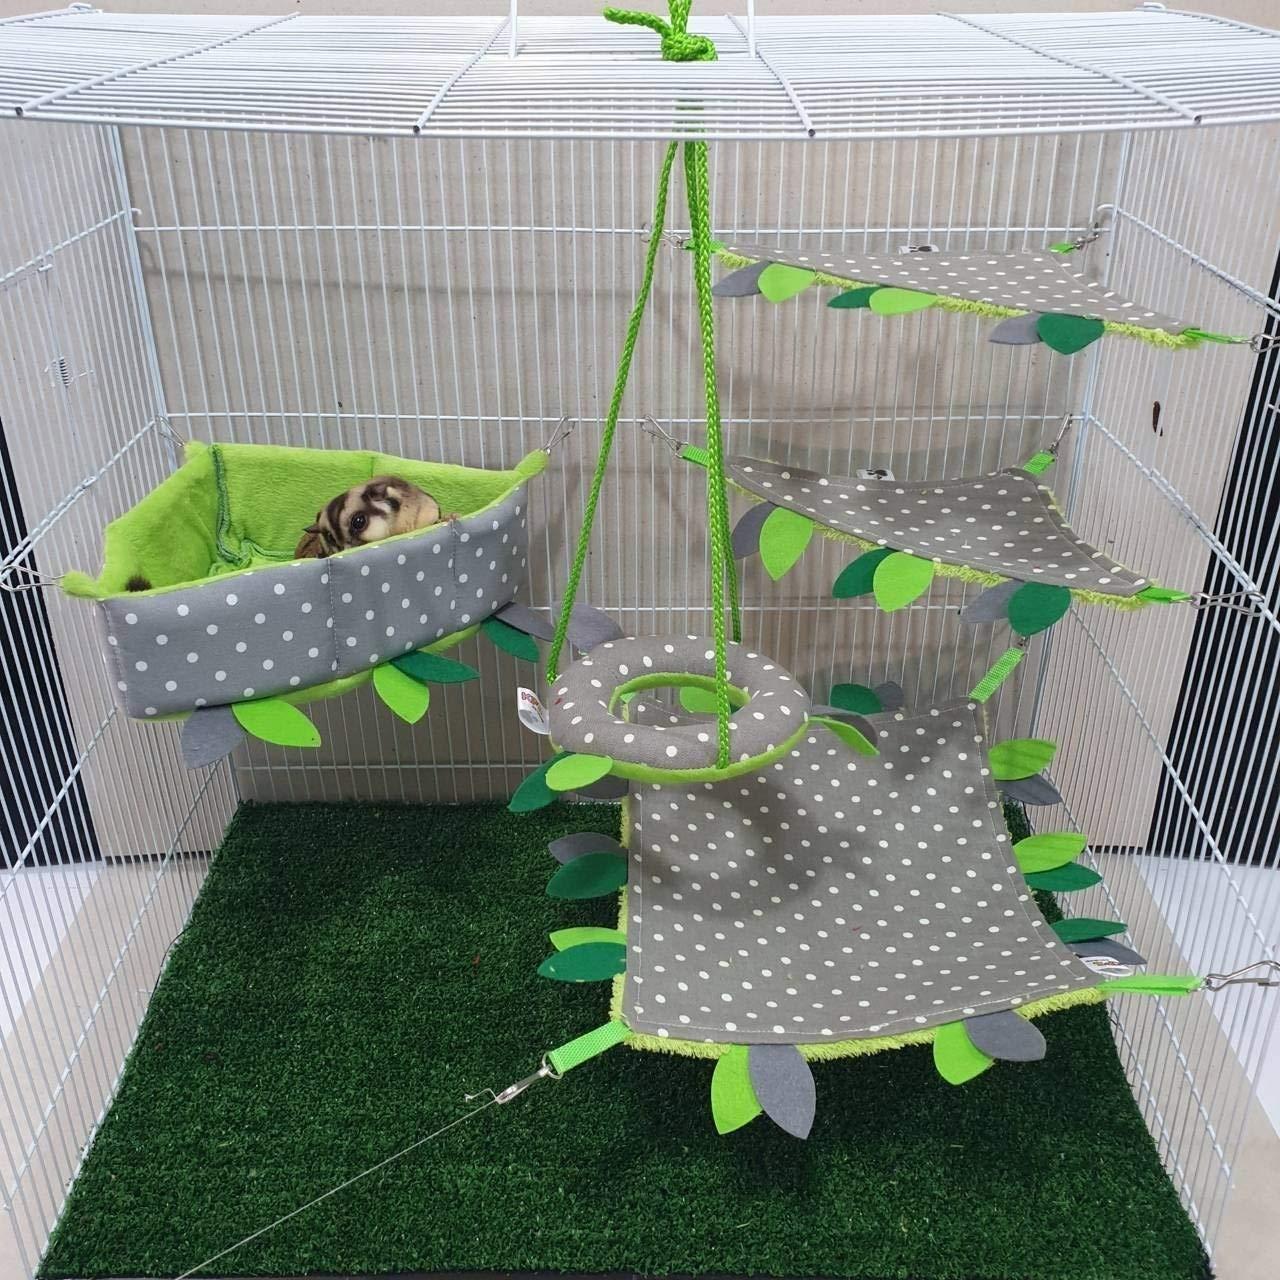 5 pieces/Set Cage Nest Set for Sugar Glider, Hamster, Squirrel, Marmoset, Chinchillas, Small Exotic Pet Cage Set Green & Grey Color